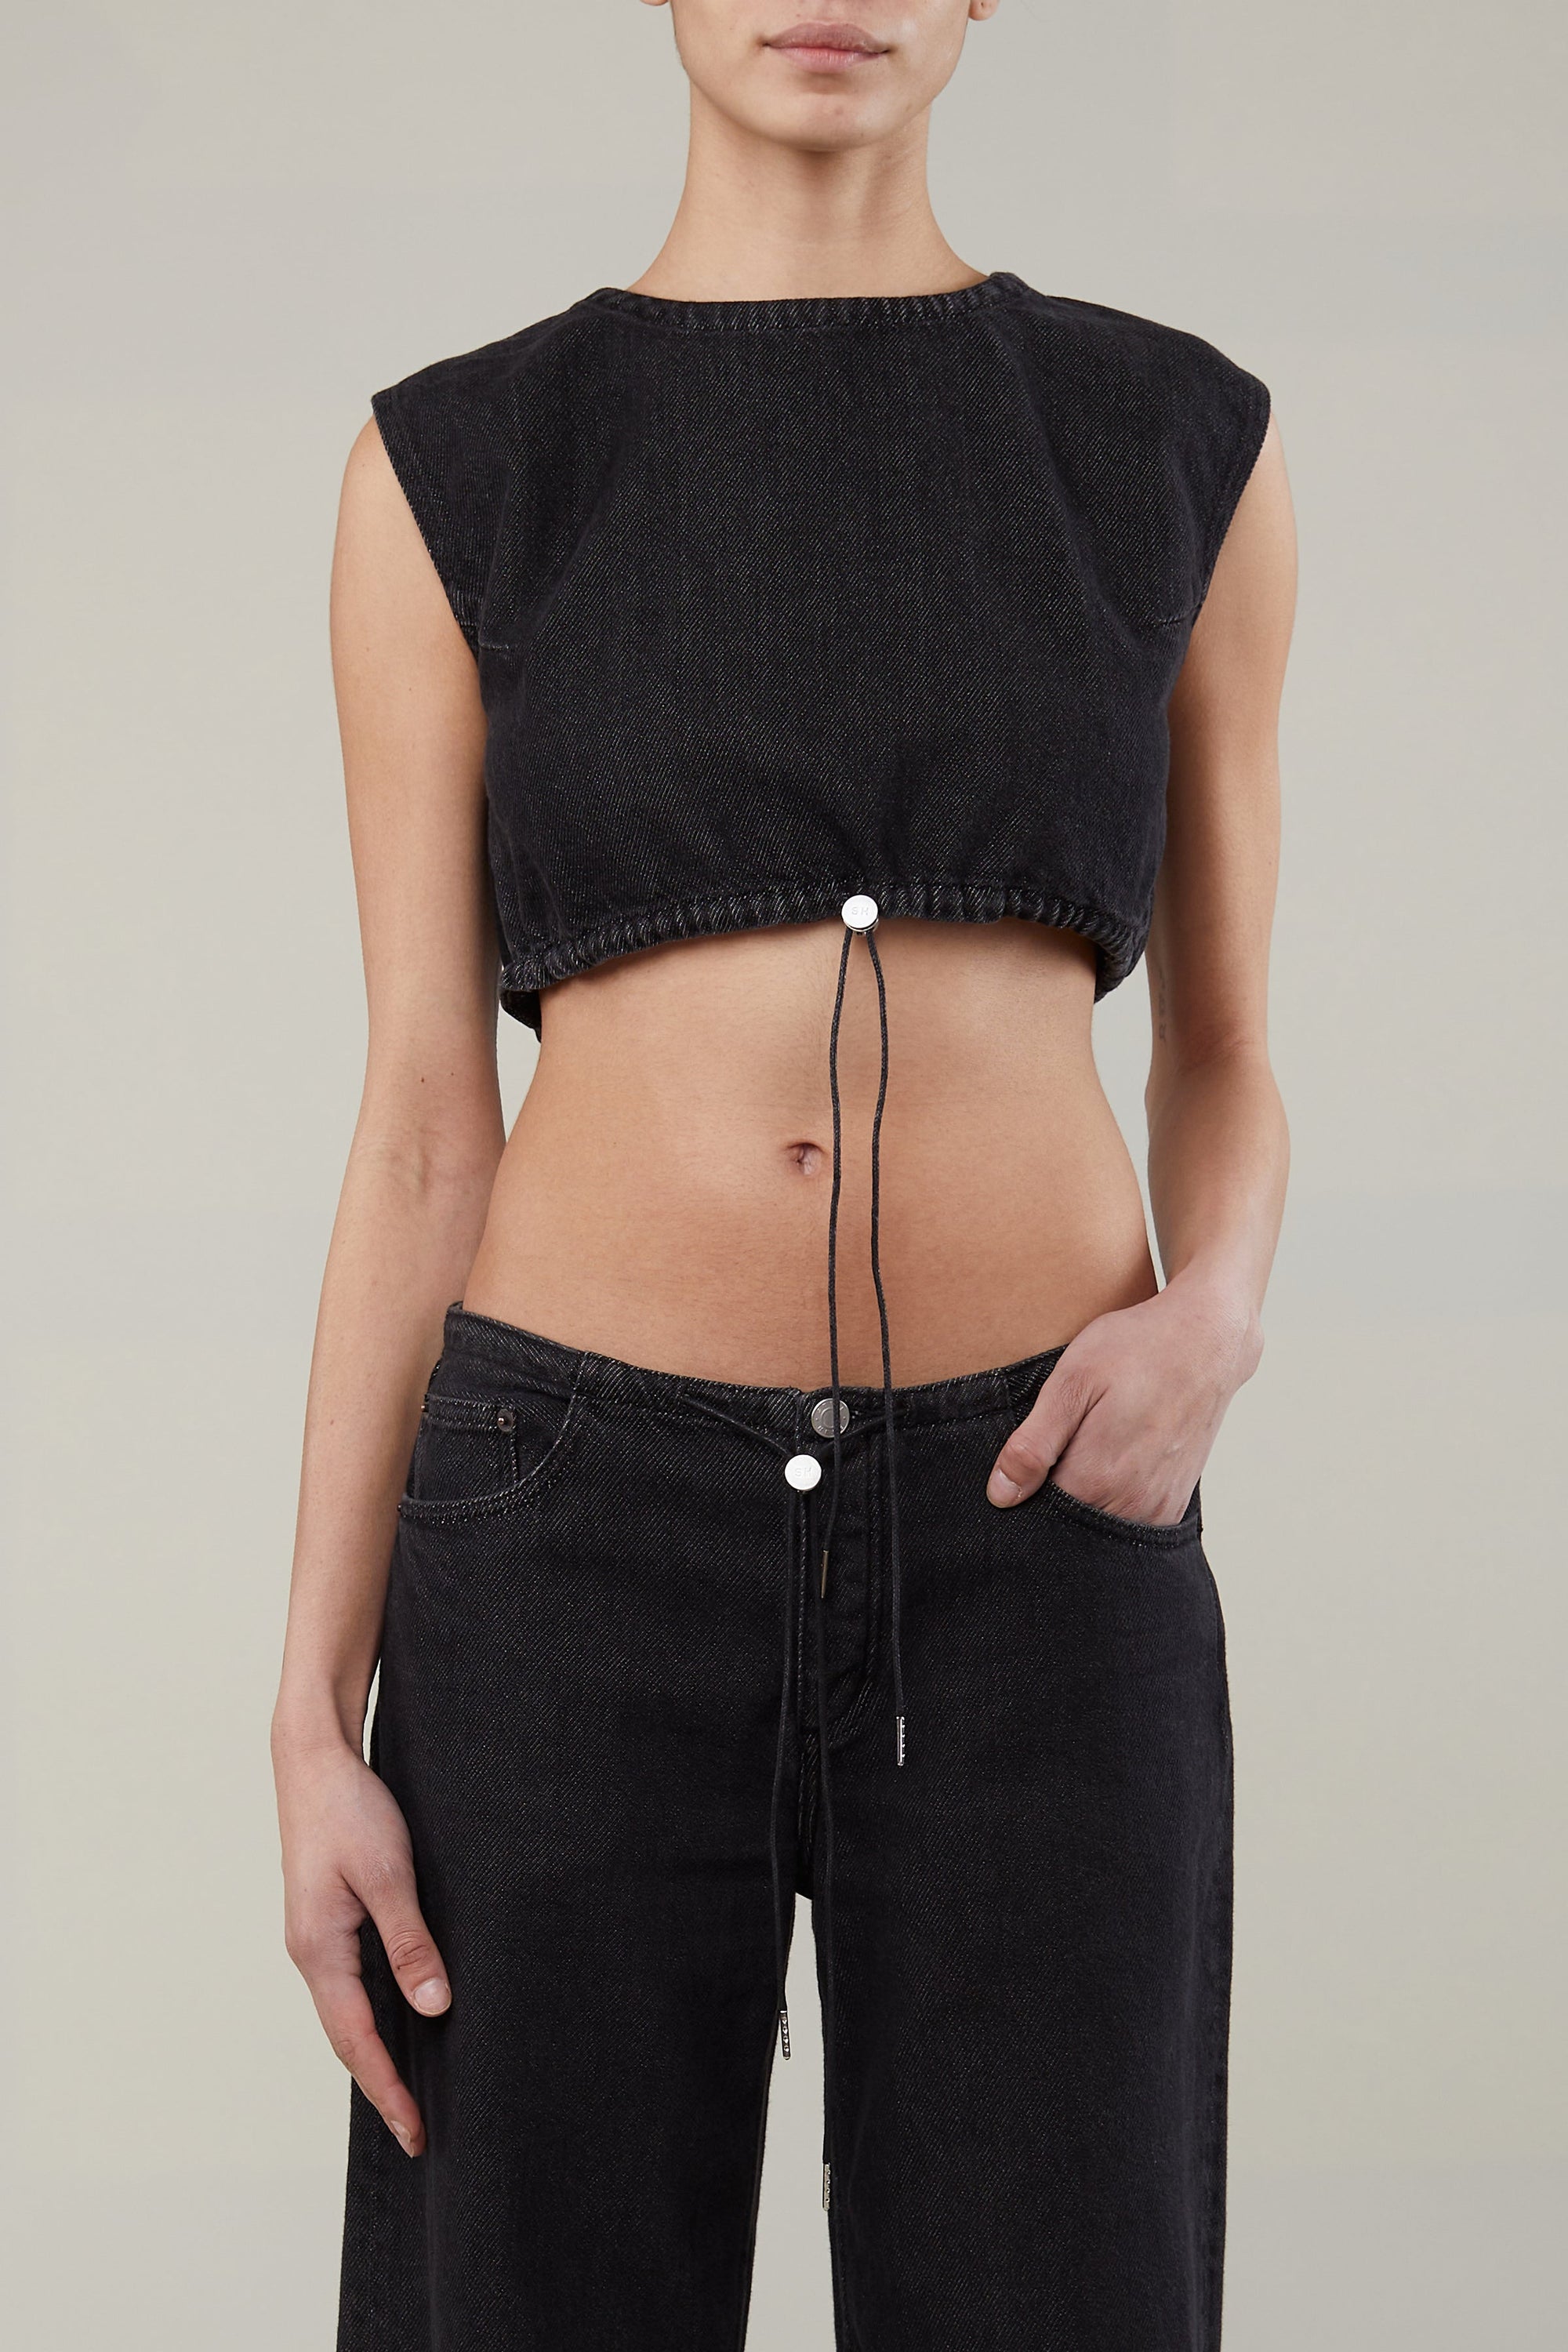 Still Here NYC Cool Crop Top washed black Boxy denim | Pipe and Row